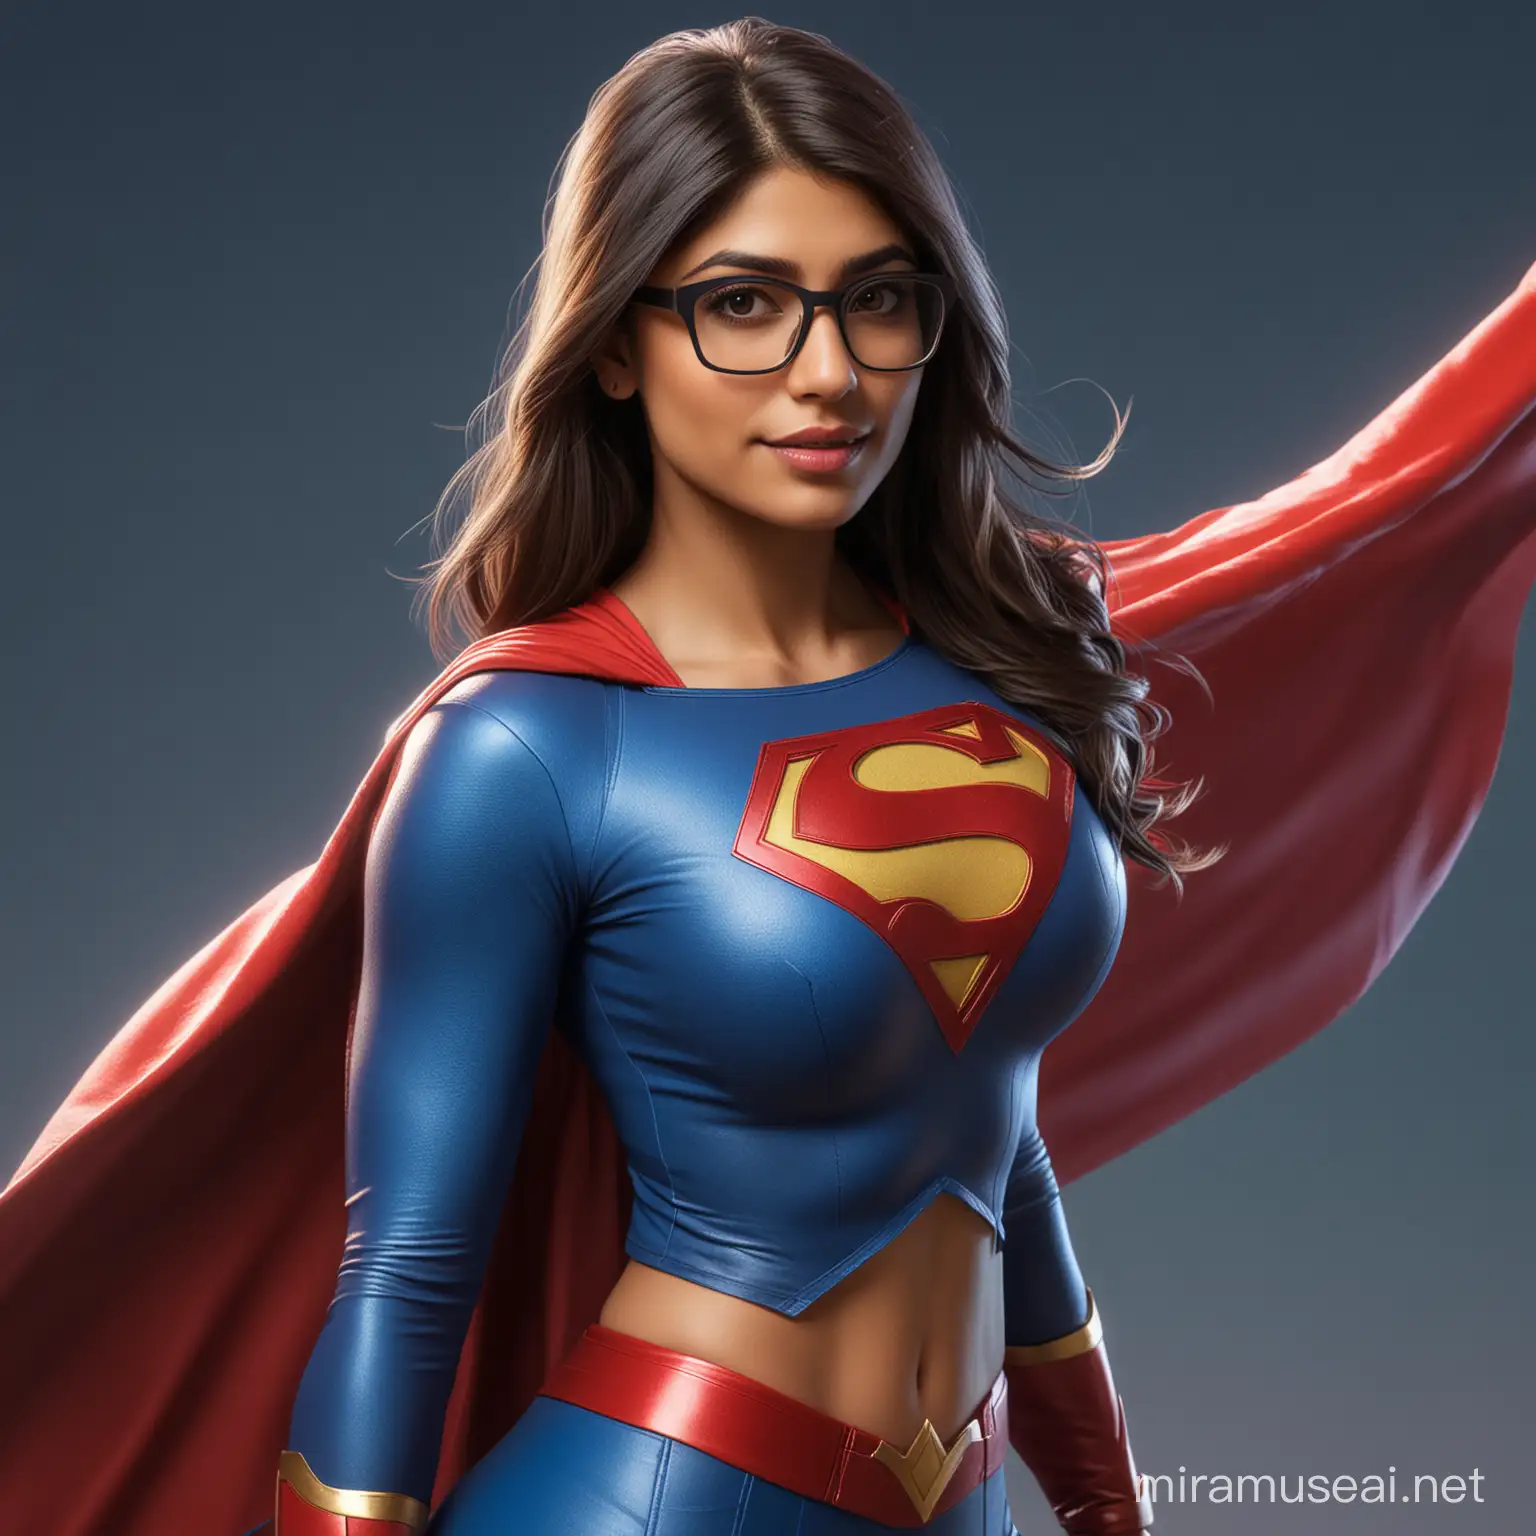 Mia Khalifa dressed as Supergirl, intricate detail, splash screen, complementary colors, fantasy concept art, 8k resolution

